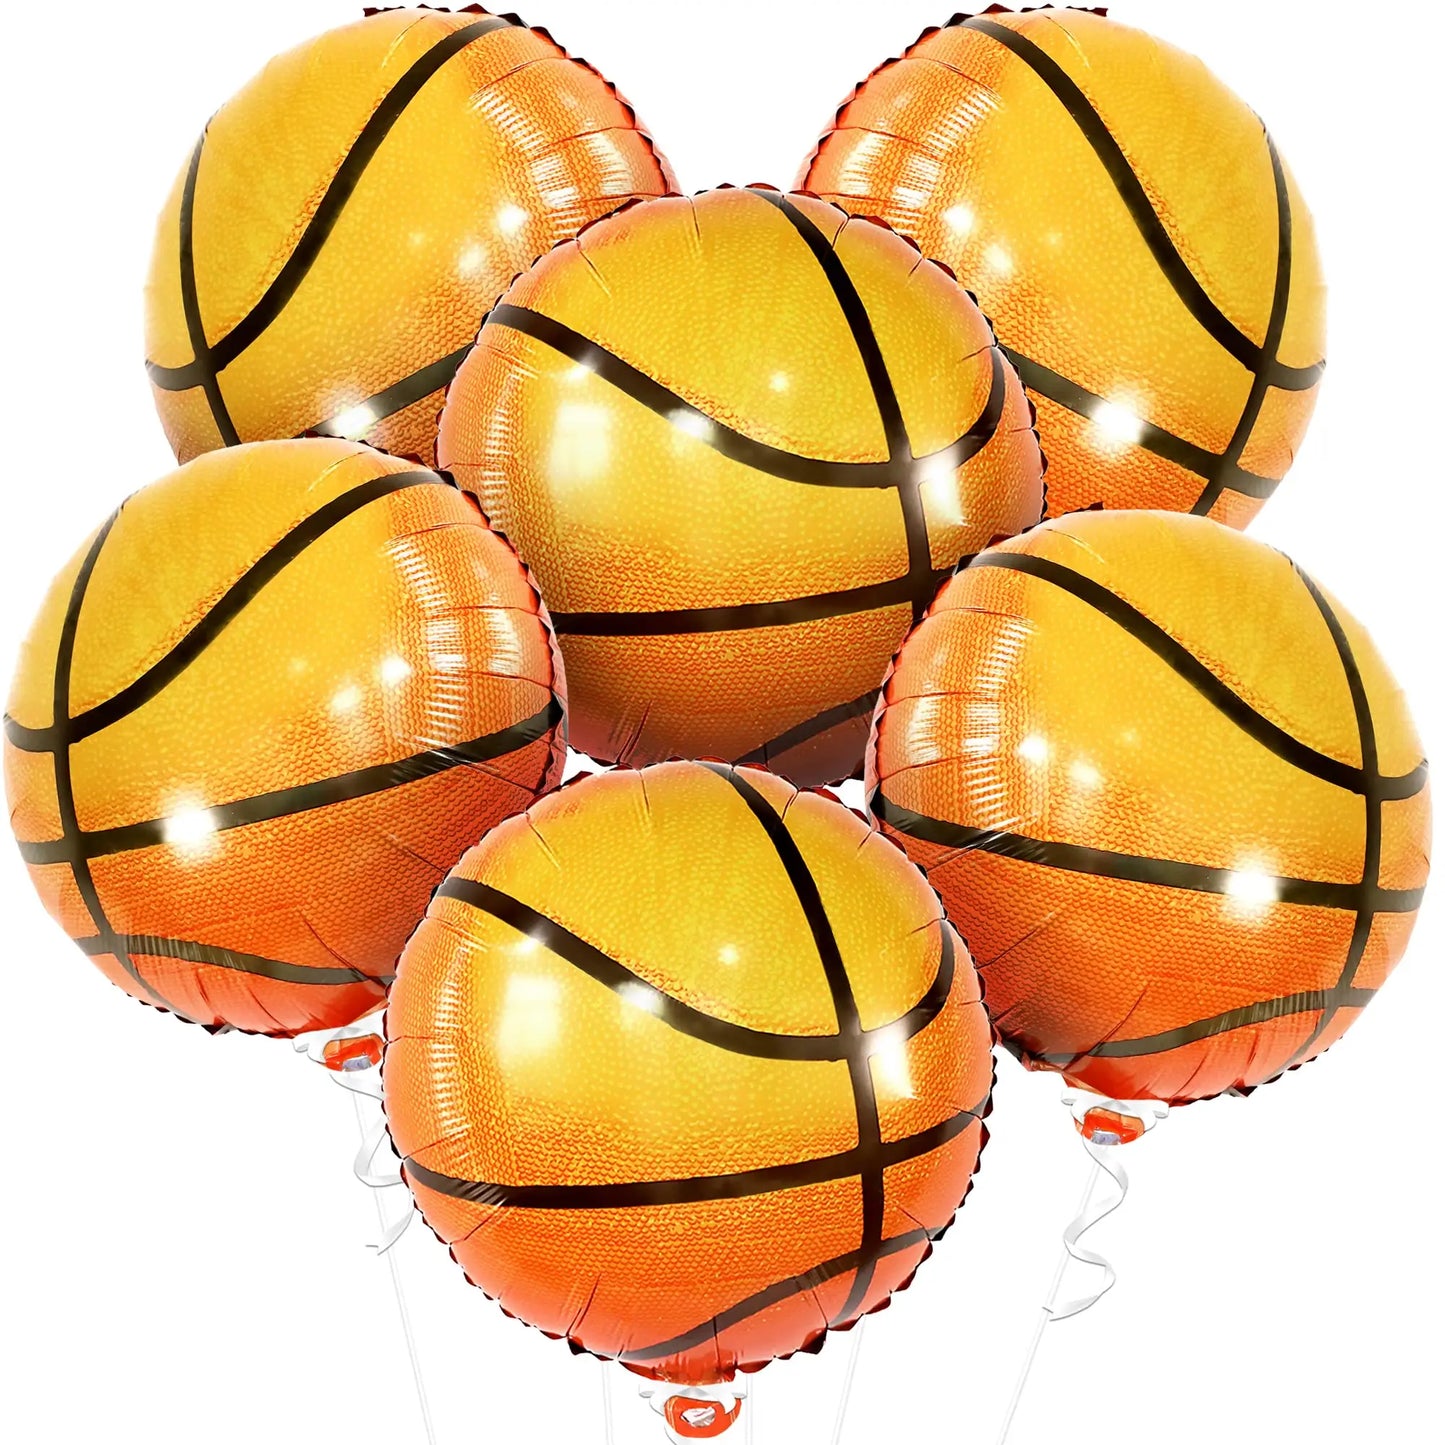 6 Pieces Basketball Balloons 18 Inch Ball Foil Balloons For Basketball Birthday Party Decorations Sports Party Kids Baloons Toys